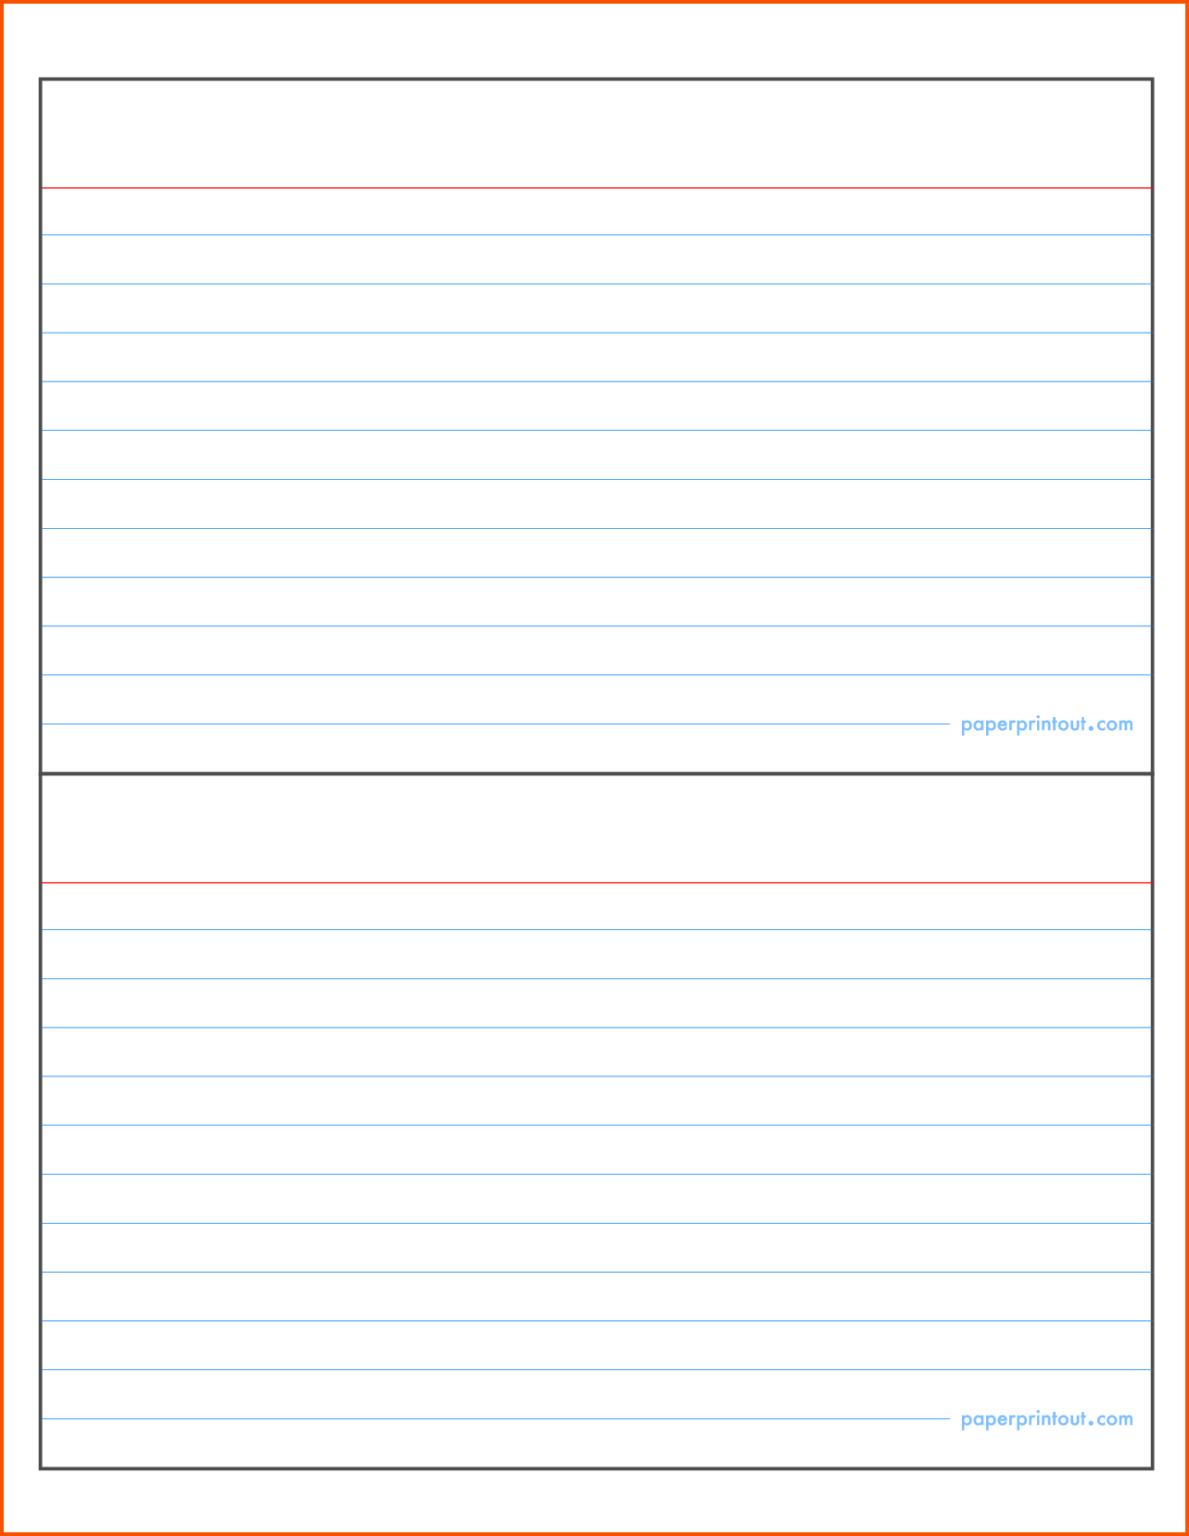 microsoft-word-index-card-template